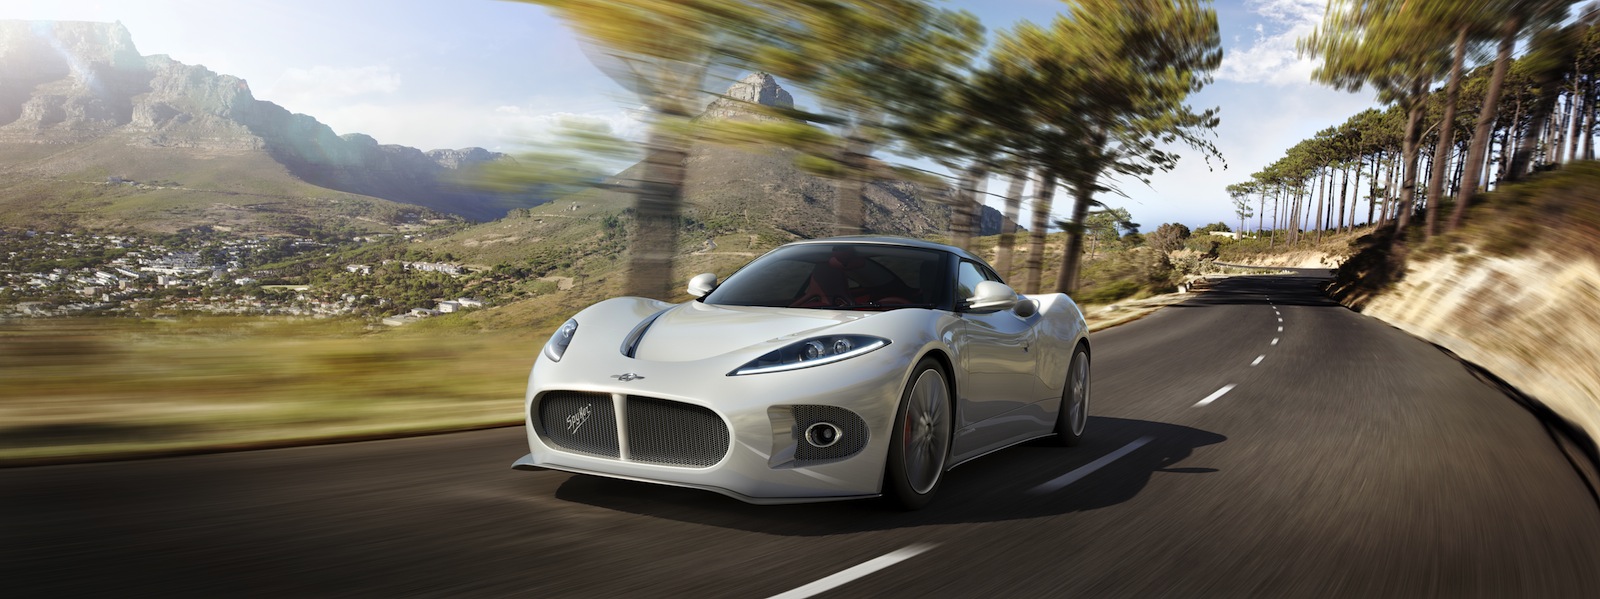 Is The Spyker A Future Collectable Classic Car?